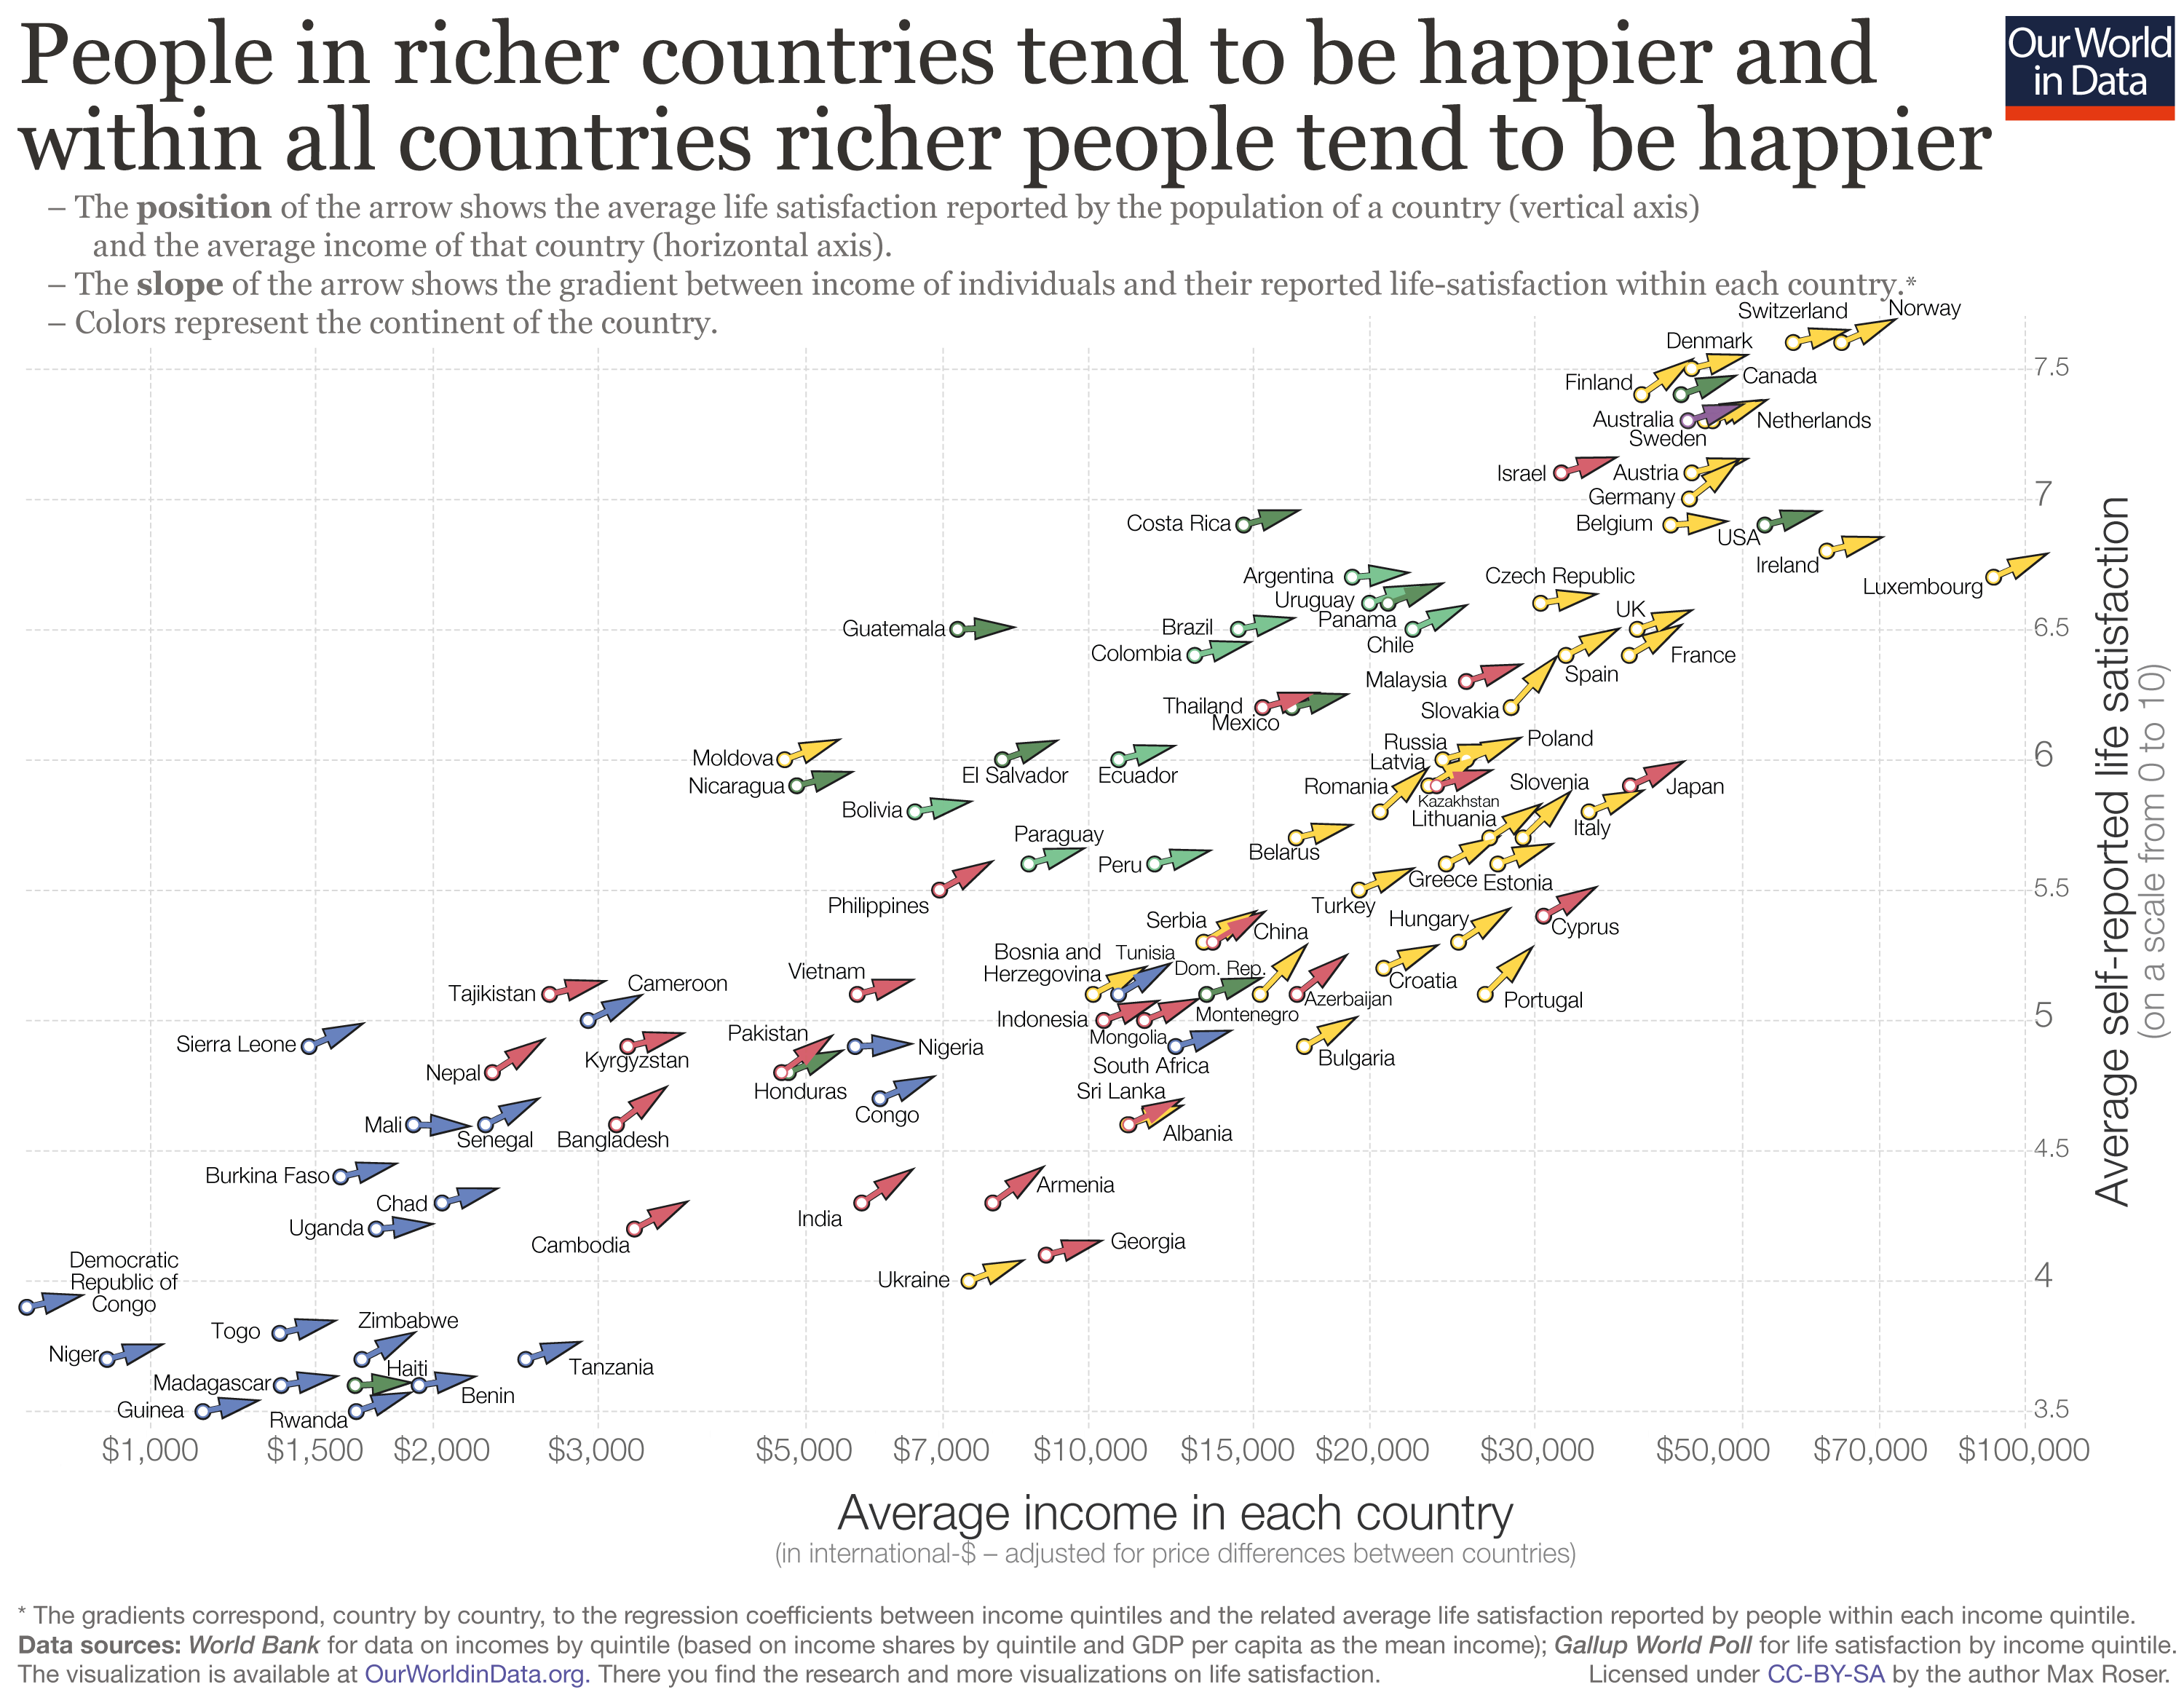 People in richer countries tend to be happier and within all countries richer people tend to be happier